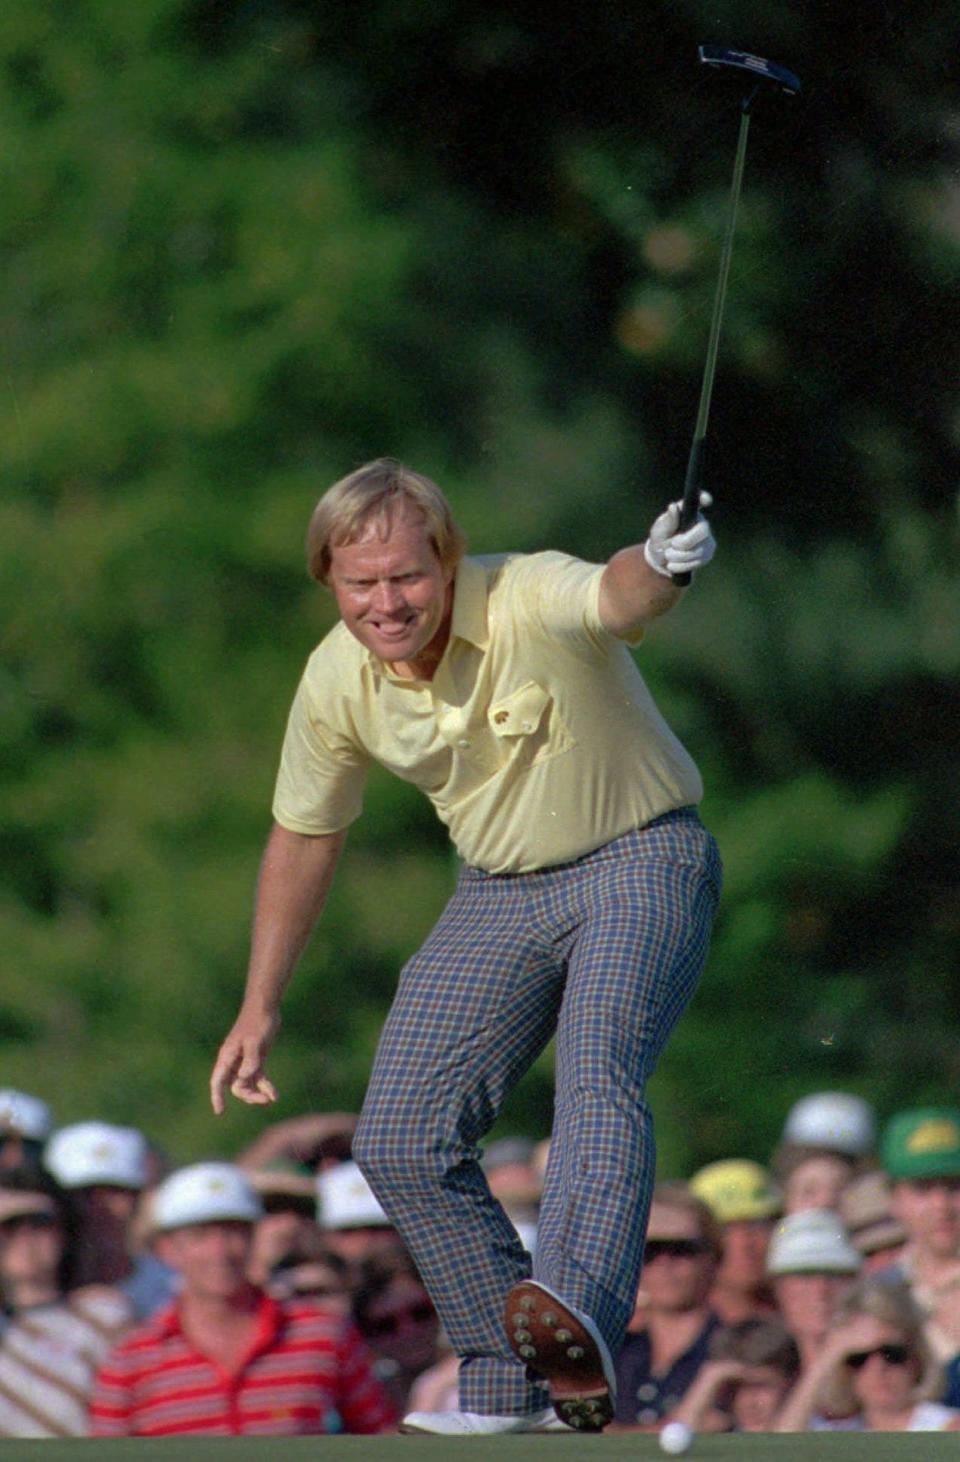 Jack Nicklaus takes pleasure in watching his putt drop for a birdie on the 17th hole at Augusta National in this April 13, 1986 file photo.